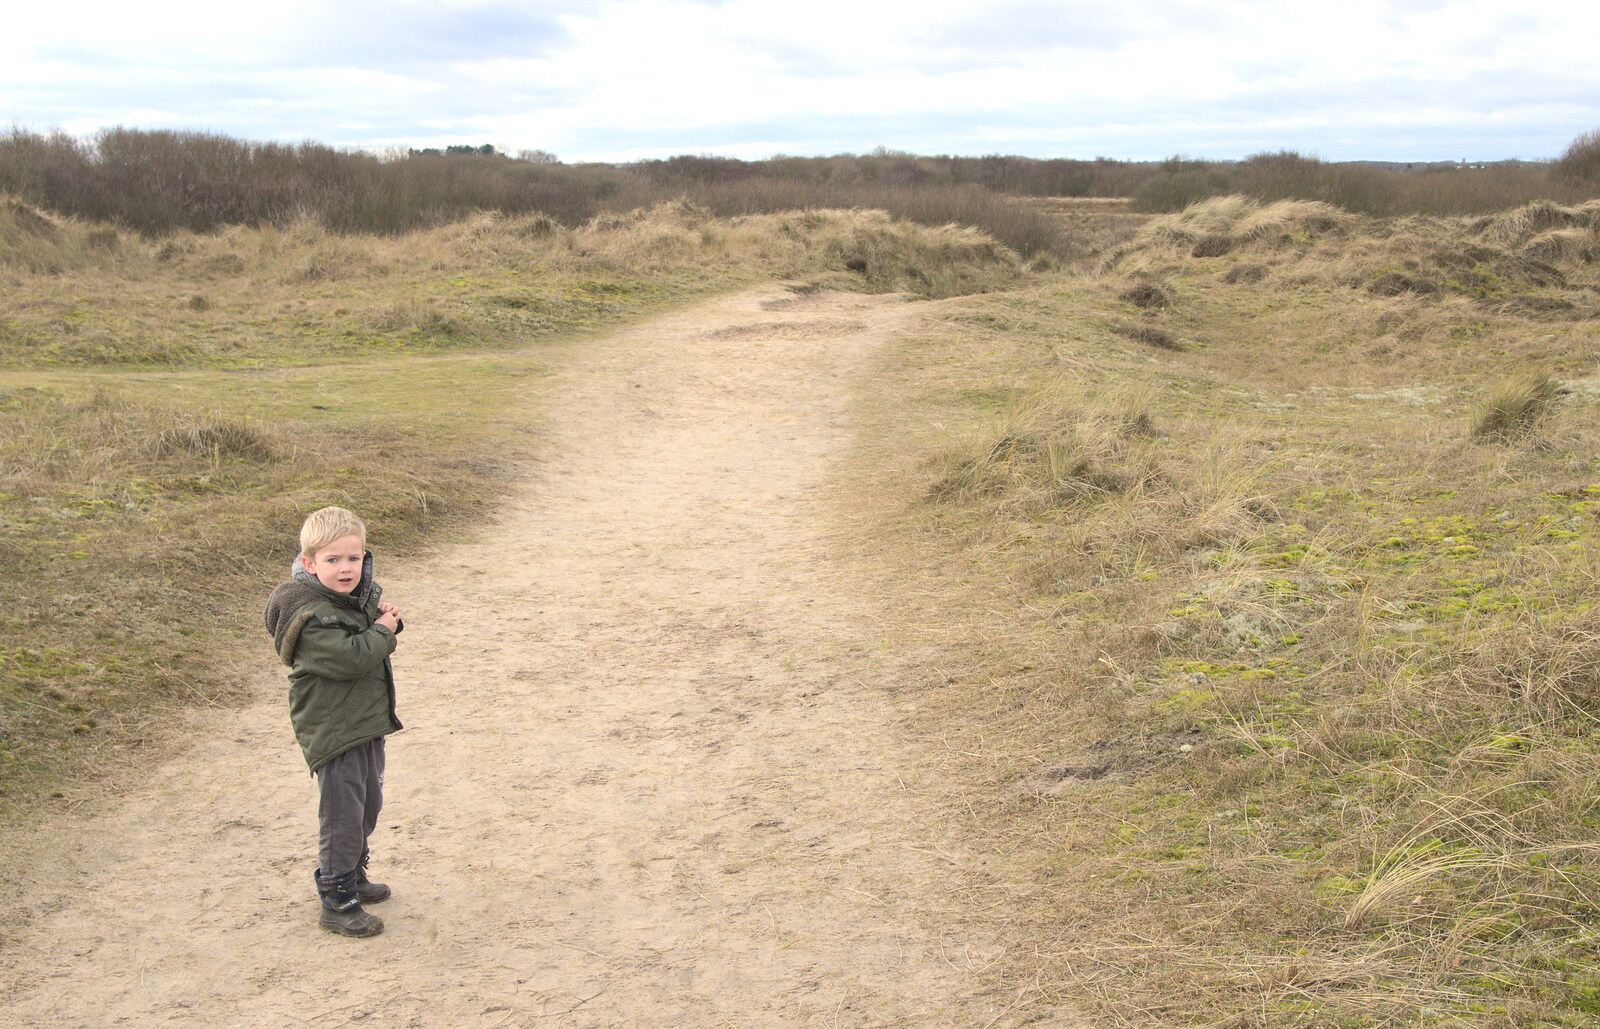 Harry looks hesitant on the path to the beach from The Seals of Horsey Gap, Norfolk - 21st February 2016